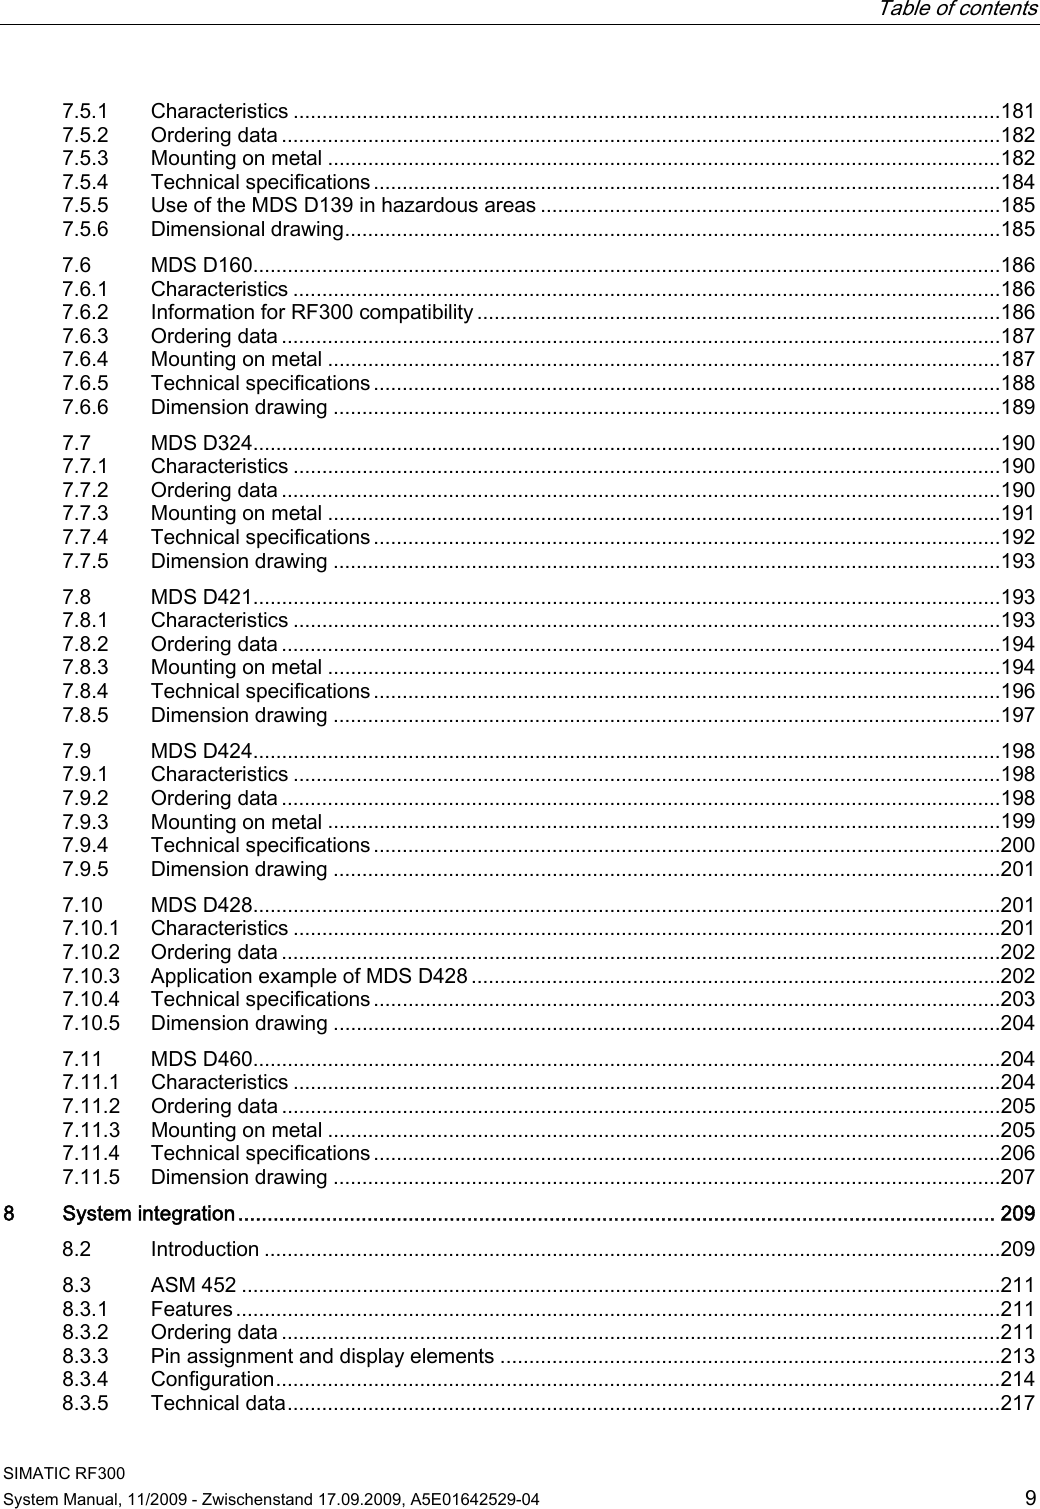   Table of contents   SIMATIC RF300 System Manual, 11/2009 - Zwischenstand 17.09.2009, A5E01642529-04  9 7.5.1  Characteristics ...........................................................................................................................181 7.5.2  Ordering data .............................................................................................................................182 7.5.3  Mounting on metal .....................................................................................................................182 7.5.4  Technical specifications .............................................................................................................184 7.5.5  Use of the MDS D139 in hazardous areas ................................................................................185 7.5.6  Dimensional drawing..................................................................................................................185 7.6  MDS D160..................................................................................................................................186 7.6.1  Characteristics ...........................................................................................................................186 7.6.2  Information for RF300 compatibility ...........................................................................................186 7.6.3  Ordering data .............................................................................................................................187 7.6.4  Mounting on metal .....................................................................................................................187 7.6.5  Technical specifications .............................................................................................................188 7.6.6  Dimension drawing ....................................................................................................................189 7.7  MDS D324..................................................................................................................................190 7.7.1  Characteristics ...........................................................................................................................190 7.7.2  Ordering data .............................................................................................................................190 7.7.3  Mounting on metal .....................................................................................................................191 7.7.4  Technical specifications .............................................................................................................192 7.7.5  Dimension drawing ....................................................................................................................193 7.8  MDS D421..................................................................................................................................193 7.8.1  Characteristics ...........................................................................................................................193 7.8.2  Ordering data .............................................................................................................................194 7.8.3  Mounting on metal .....................................................................................................................194 7.8.4  Technical specifications .............................................................................................................196 7.8.5  Dimension drawing ....................................................................................................................197 7.9  MDS D424..................................................................................................................................198 7.9.1  Characteristics ...........................................................................................................................198 7.9.2  Ordering data .............................................................................................................................198 7.9.3  Mounting on metal .....................................................................................................................199 7.9.4  Technical specifications .............................................................................................................200 7.9.5  Dimension drawing ....................................................................................................................201 7.10  MDS D428..................................................................................................................................201 7.10.1  Characteristics ...........................................................................................................................201 7.10.2  Ordering data .............................................................................................................................202 7.10.3  Application example of MDS D428 ............................................................................................202 7.10.4  Technical specifications .............................................................................................................203 7.10.5  Dimension drawing ....................................................................................................................204 7.11  MDS D460..................................................................................................................................204 7.11.1  Characteristics ...........................................................................................................................204 7.11.2  Ordering data .............................................................................................................................205 7.11.3  Mounting on metal .....................................................................................................................205 7.11.4  Technical specifications .............................................................................................................206 7.11.5  Dimension drawing ....................................................................................................................207 8  System integration................................................................................................................................. 209 8.2  Introduction ................................................................................................................................209 8.3  ASM 452 ....................................................................................................................................211 8.3.1  Features.....................................................................................................................................211 8.3.2  Ordering data .............................................................................................................................211 8.3.3  Pin assignment and display elements .......................................................................................213 8.3.4  Configuration..............................................................................................................................214 8.3.5  Technical data............................................................................................................................217 